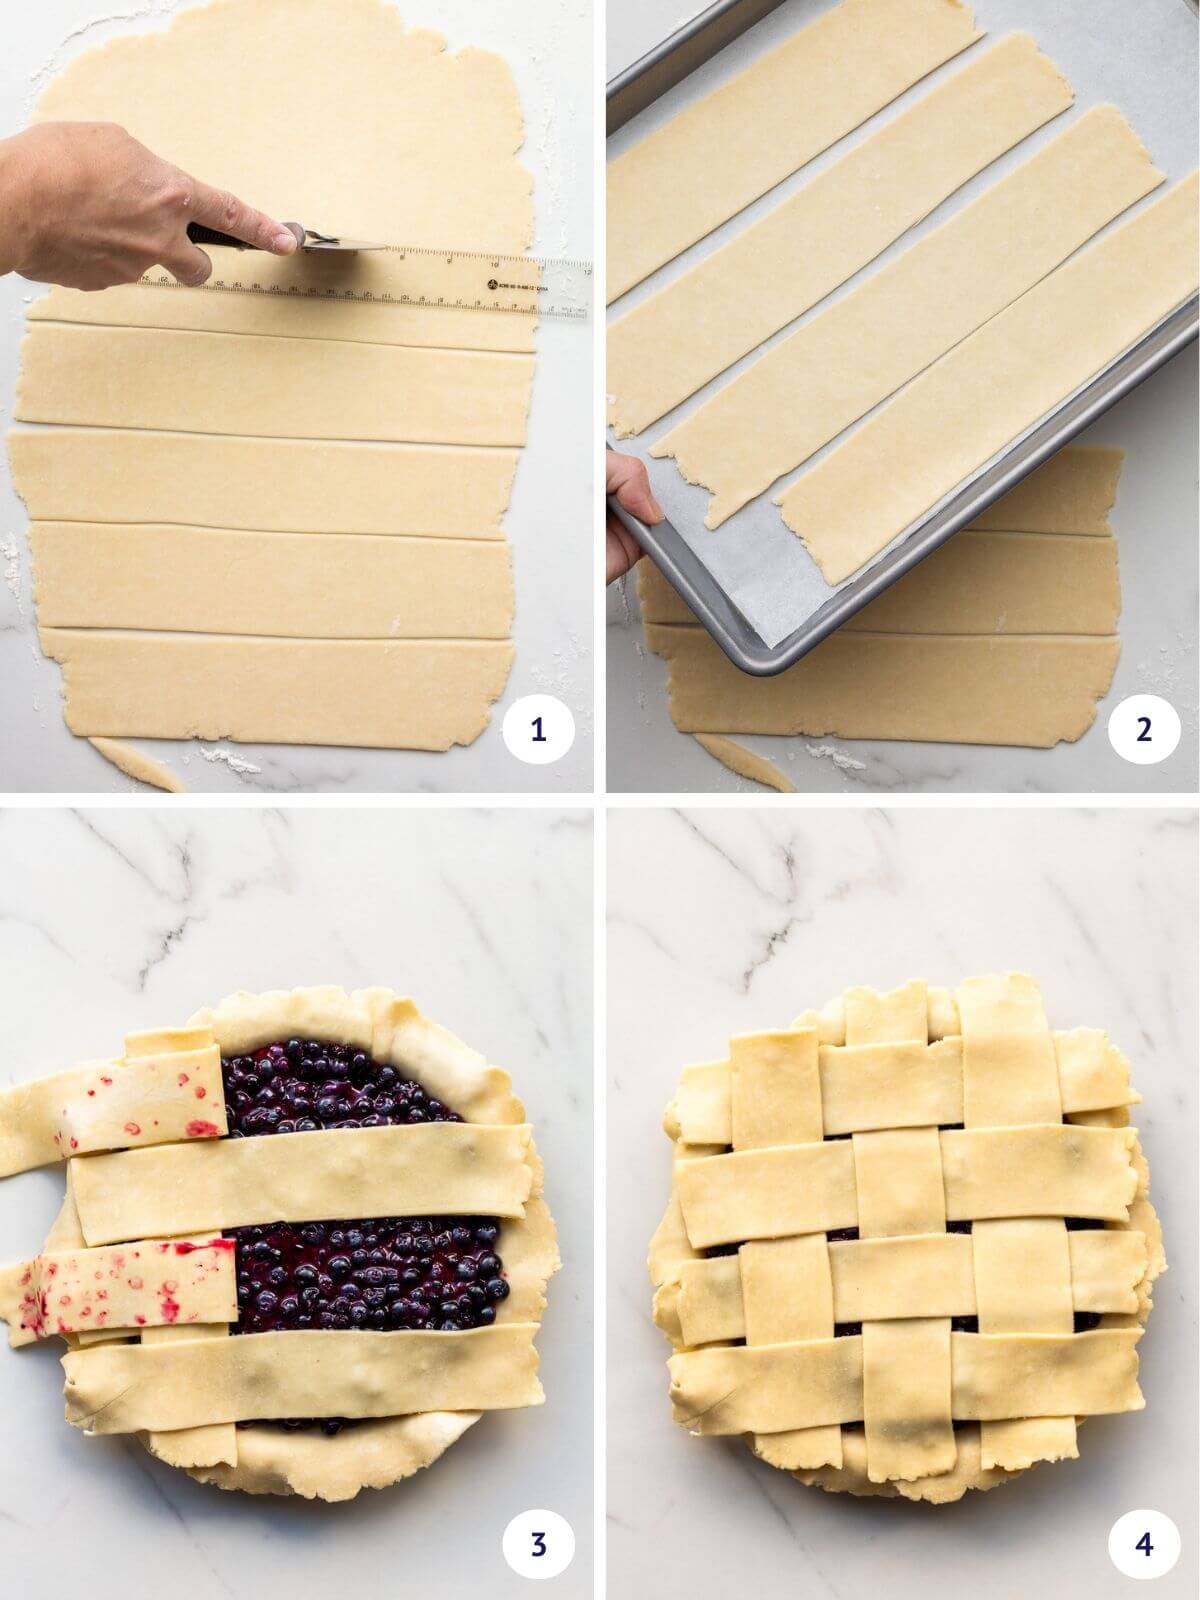 Steps for cutting dough and weaving a lattice pie crust top on a blueberry pie.